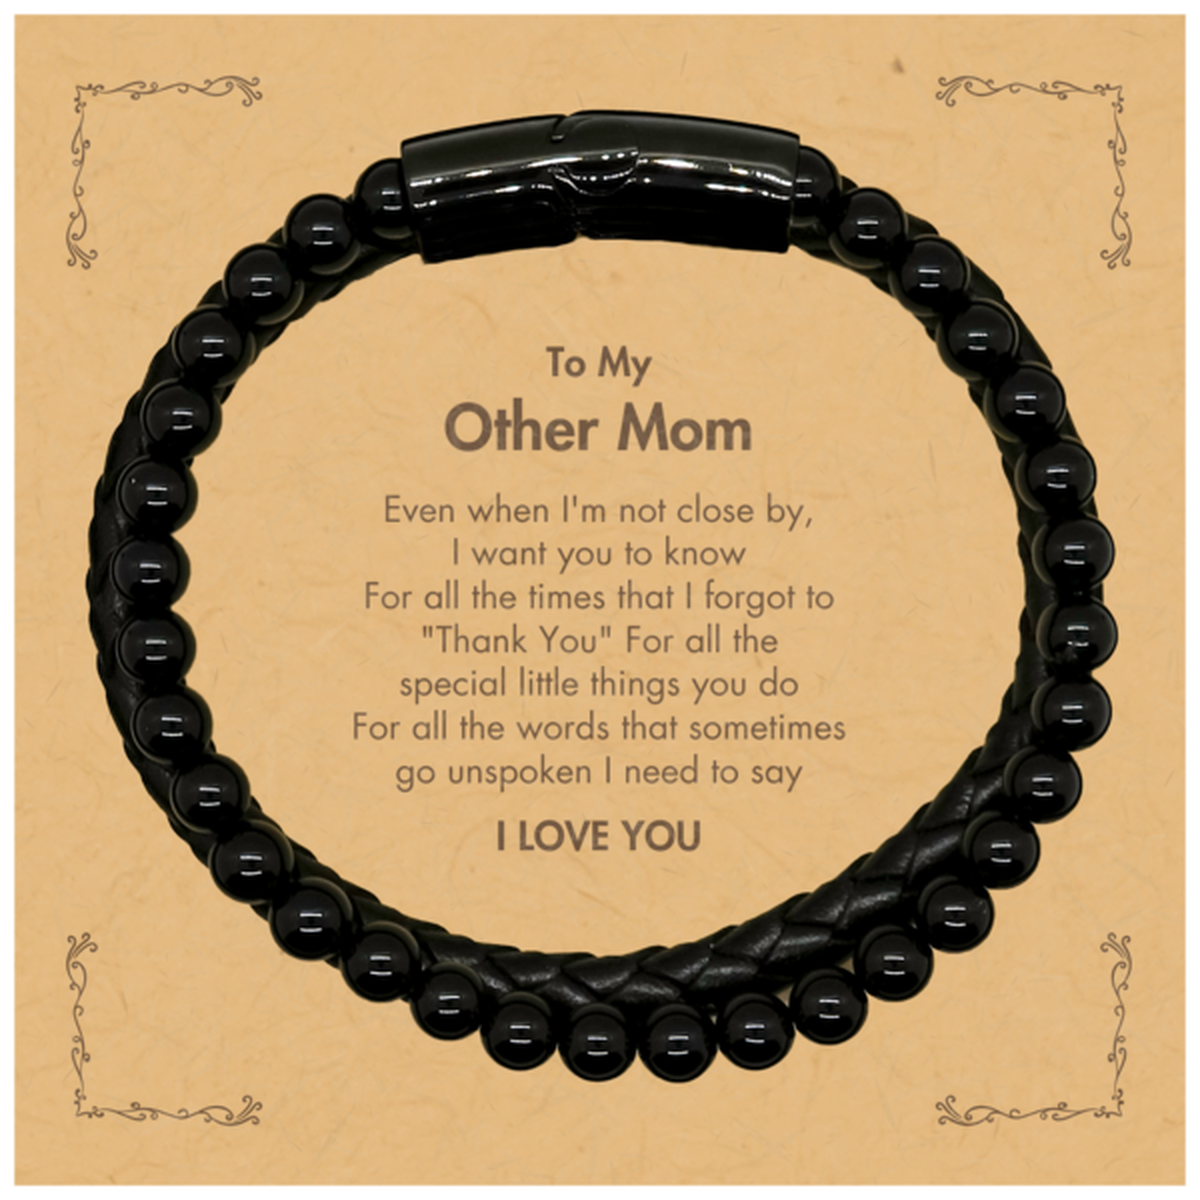 Thank You Gifts for Other Mom, Keepsake Stone Leather Bracelets Gifts for Other Mom Birthday Mother's day Father's Day Other Mom For all the words That sometimes go unspoken I need to say I LOVE YOU